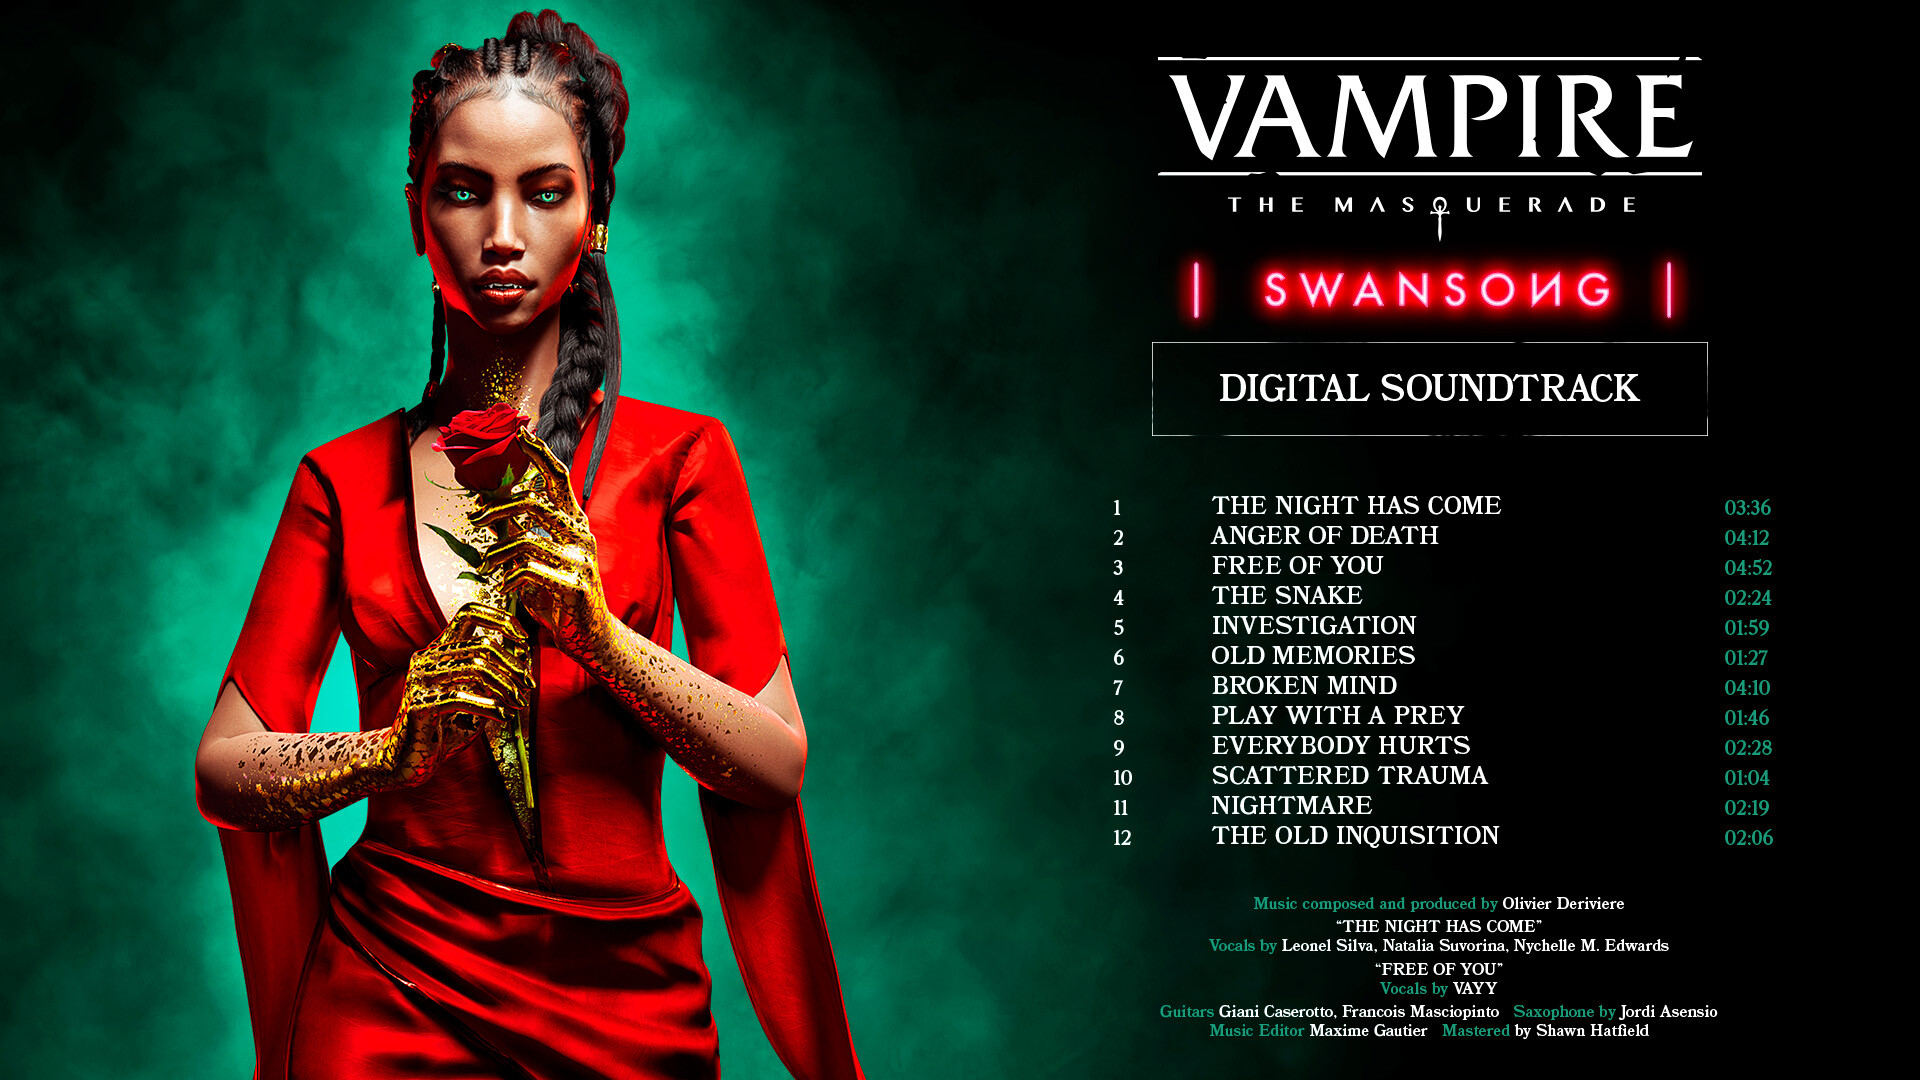 Vampire: The Masquerade - Swansong Digital Soundtrack on Steam